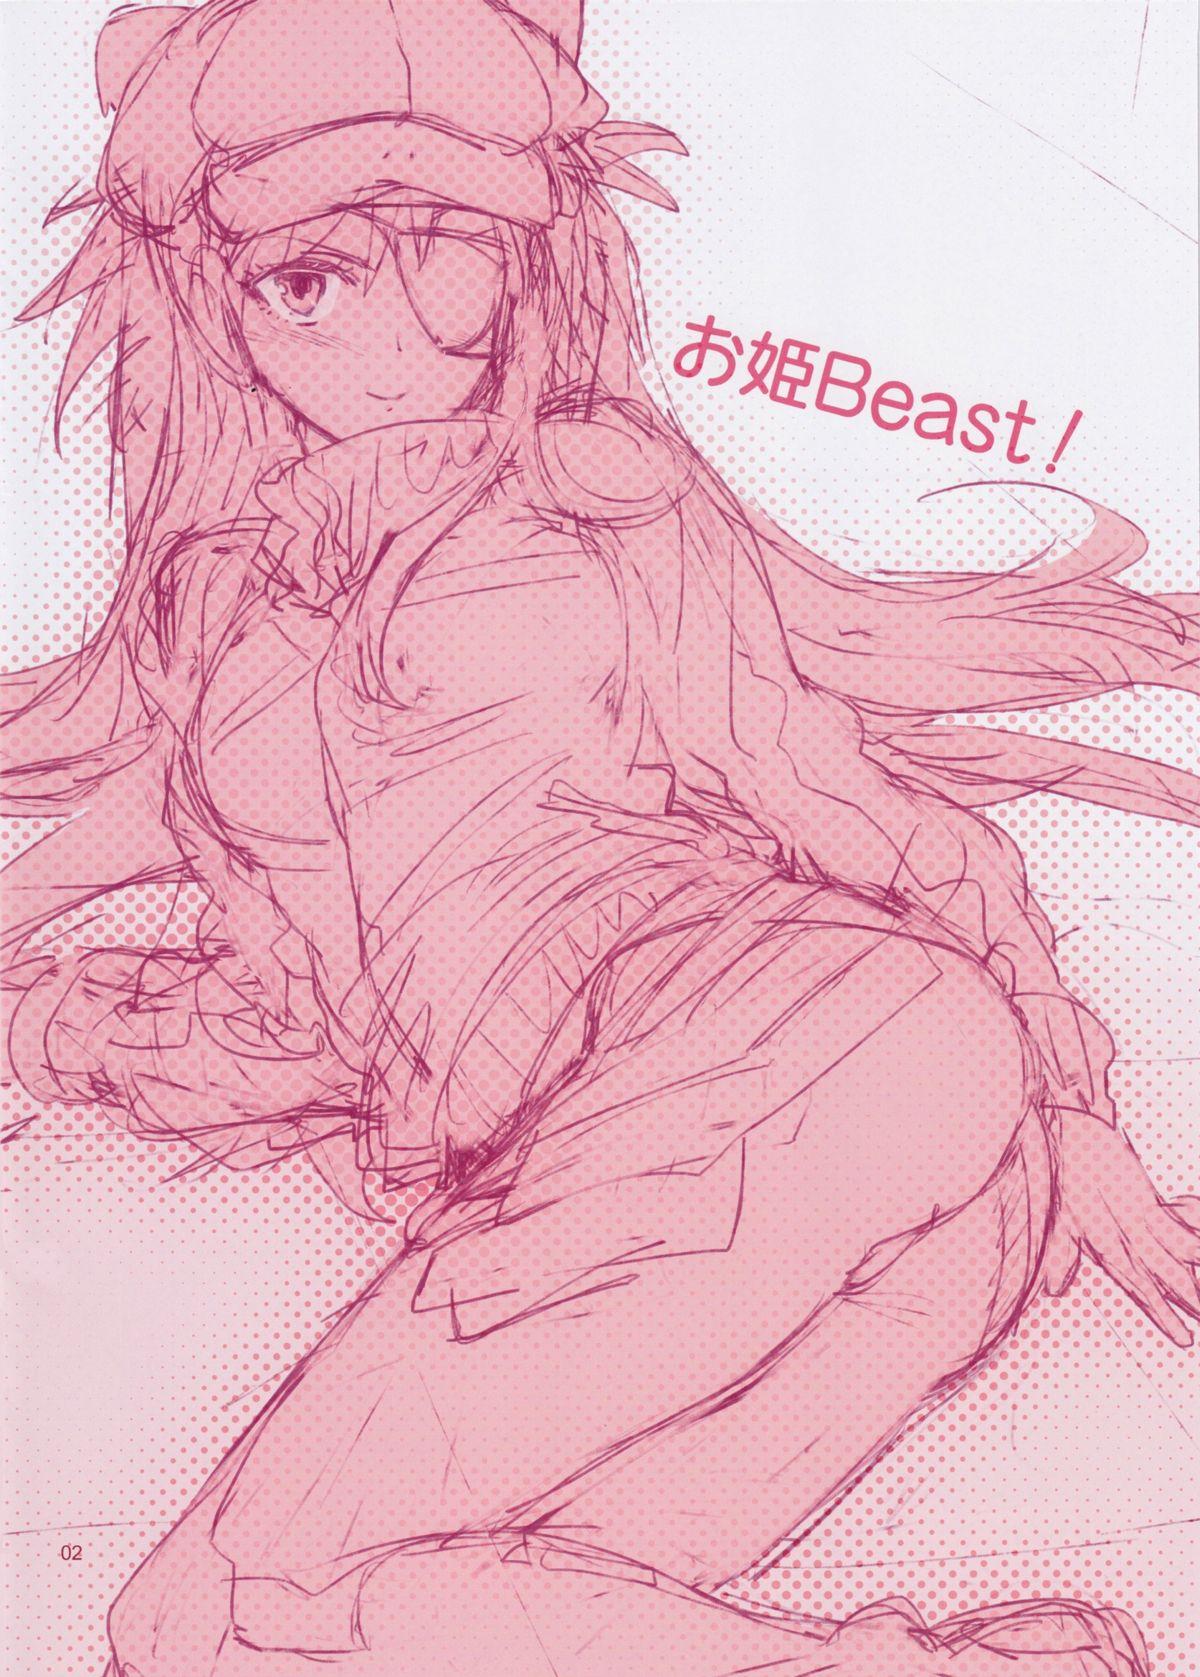 White Girl Ohime Beast! - Neon genesis evangelion Butthole - Page 2